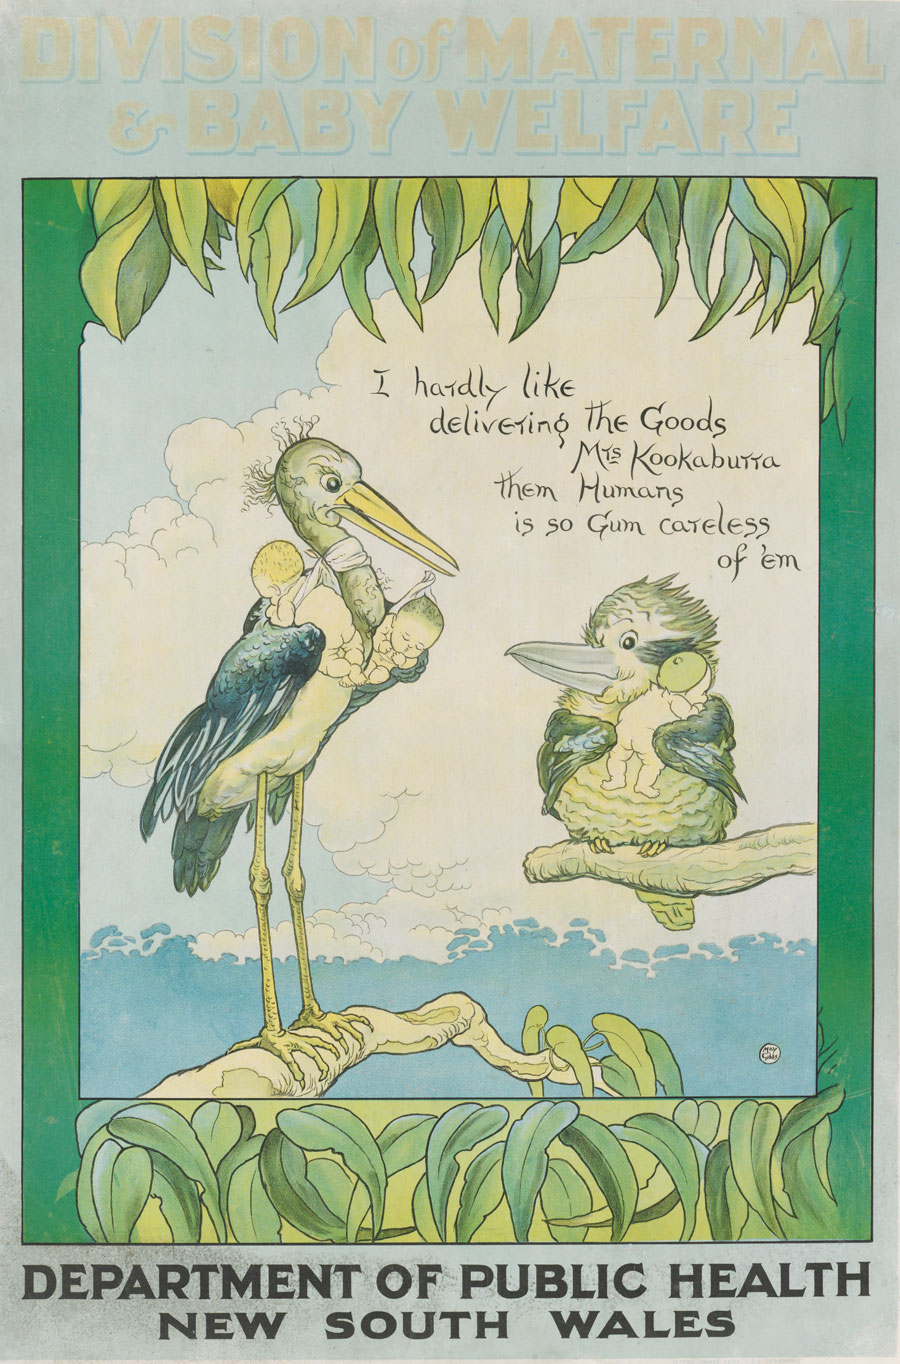 A poster drawn for NSW Public Health Department maternal and baby welfare drawn in 1918. Dr Stork is seen delivering two human babies. Mrs Kookaburra, who holds a gumnut baby looks on. Dr. Stork remarks “I hardly like delivering the goods Mrs Kookaburra them humans is so gum careless of ‘em”. This poster was used to promote the services of the department and address the issue of infant mortality.  